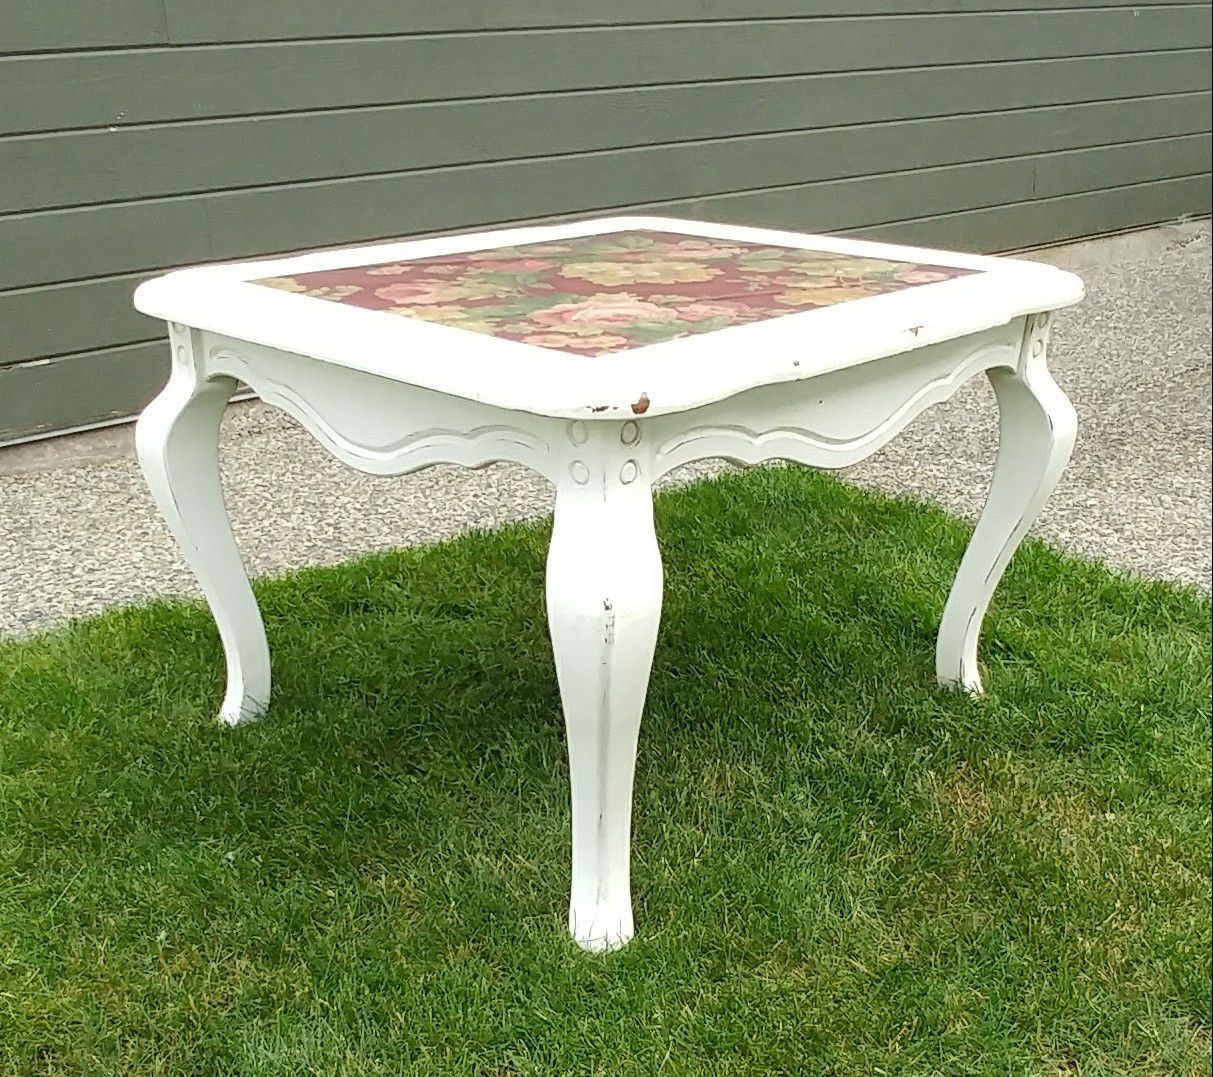 Vintage Shabby Chic Coffee Table/End Table - Distressed White